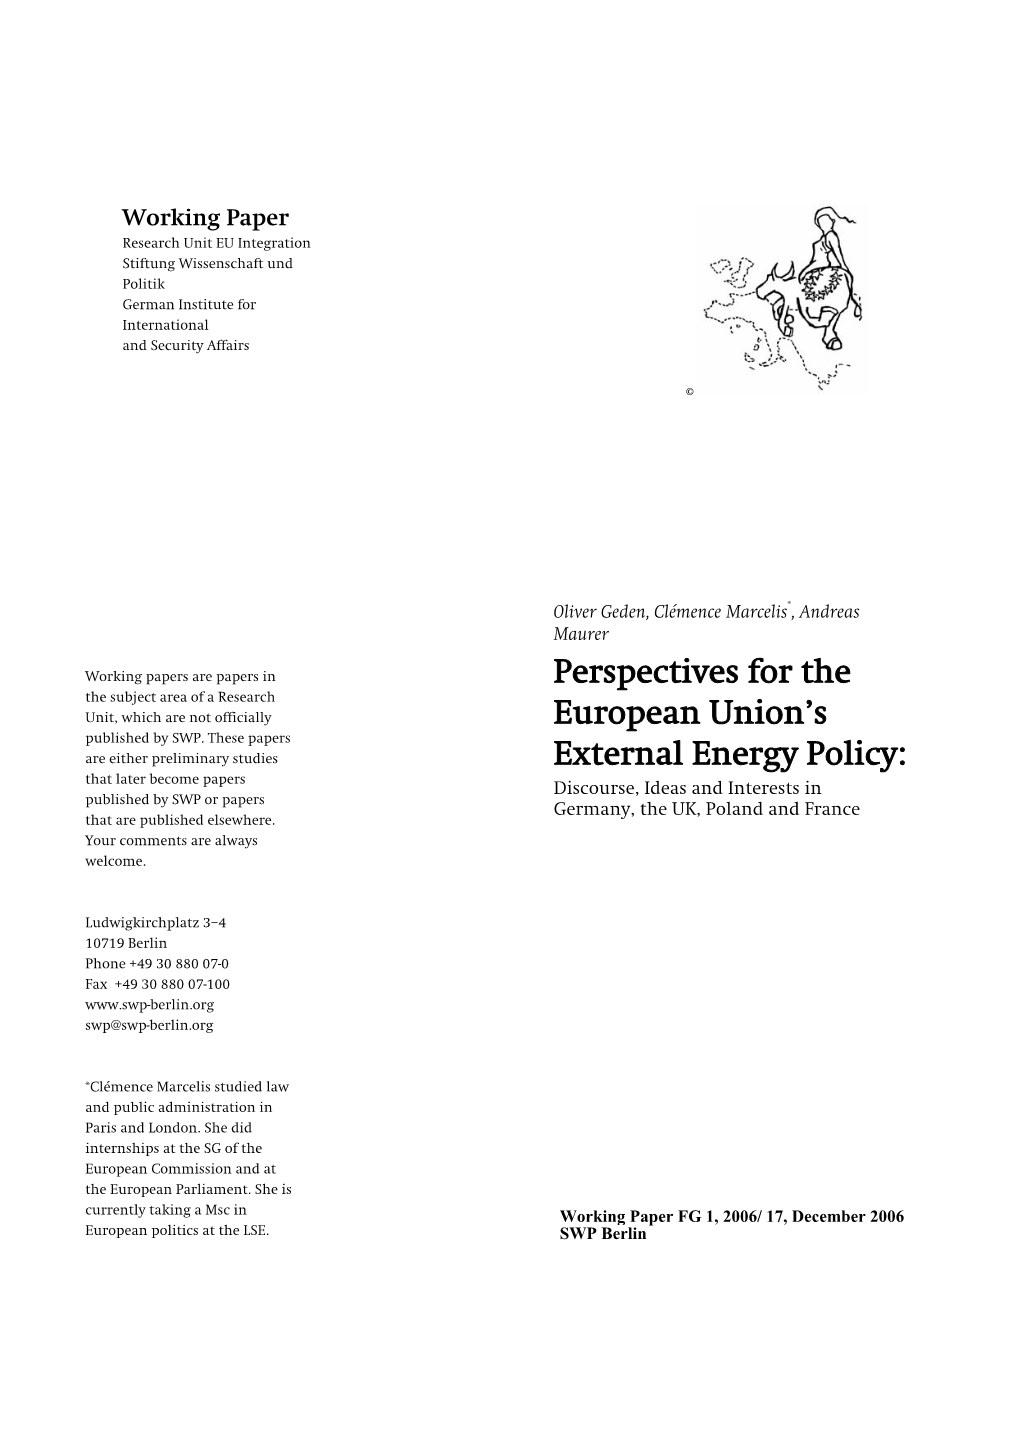 Perspectives for the European Union's External Energy Policy